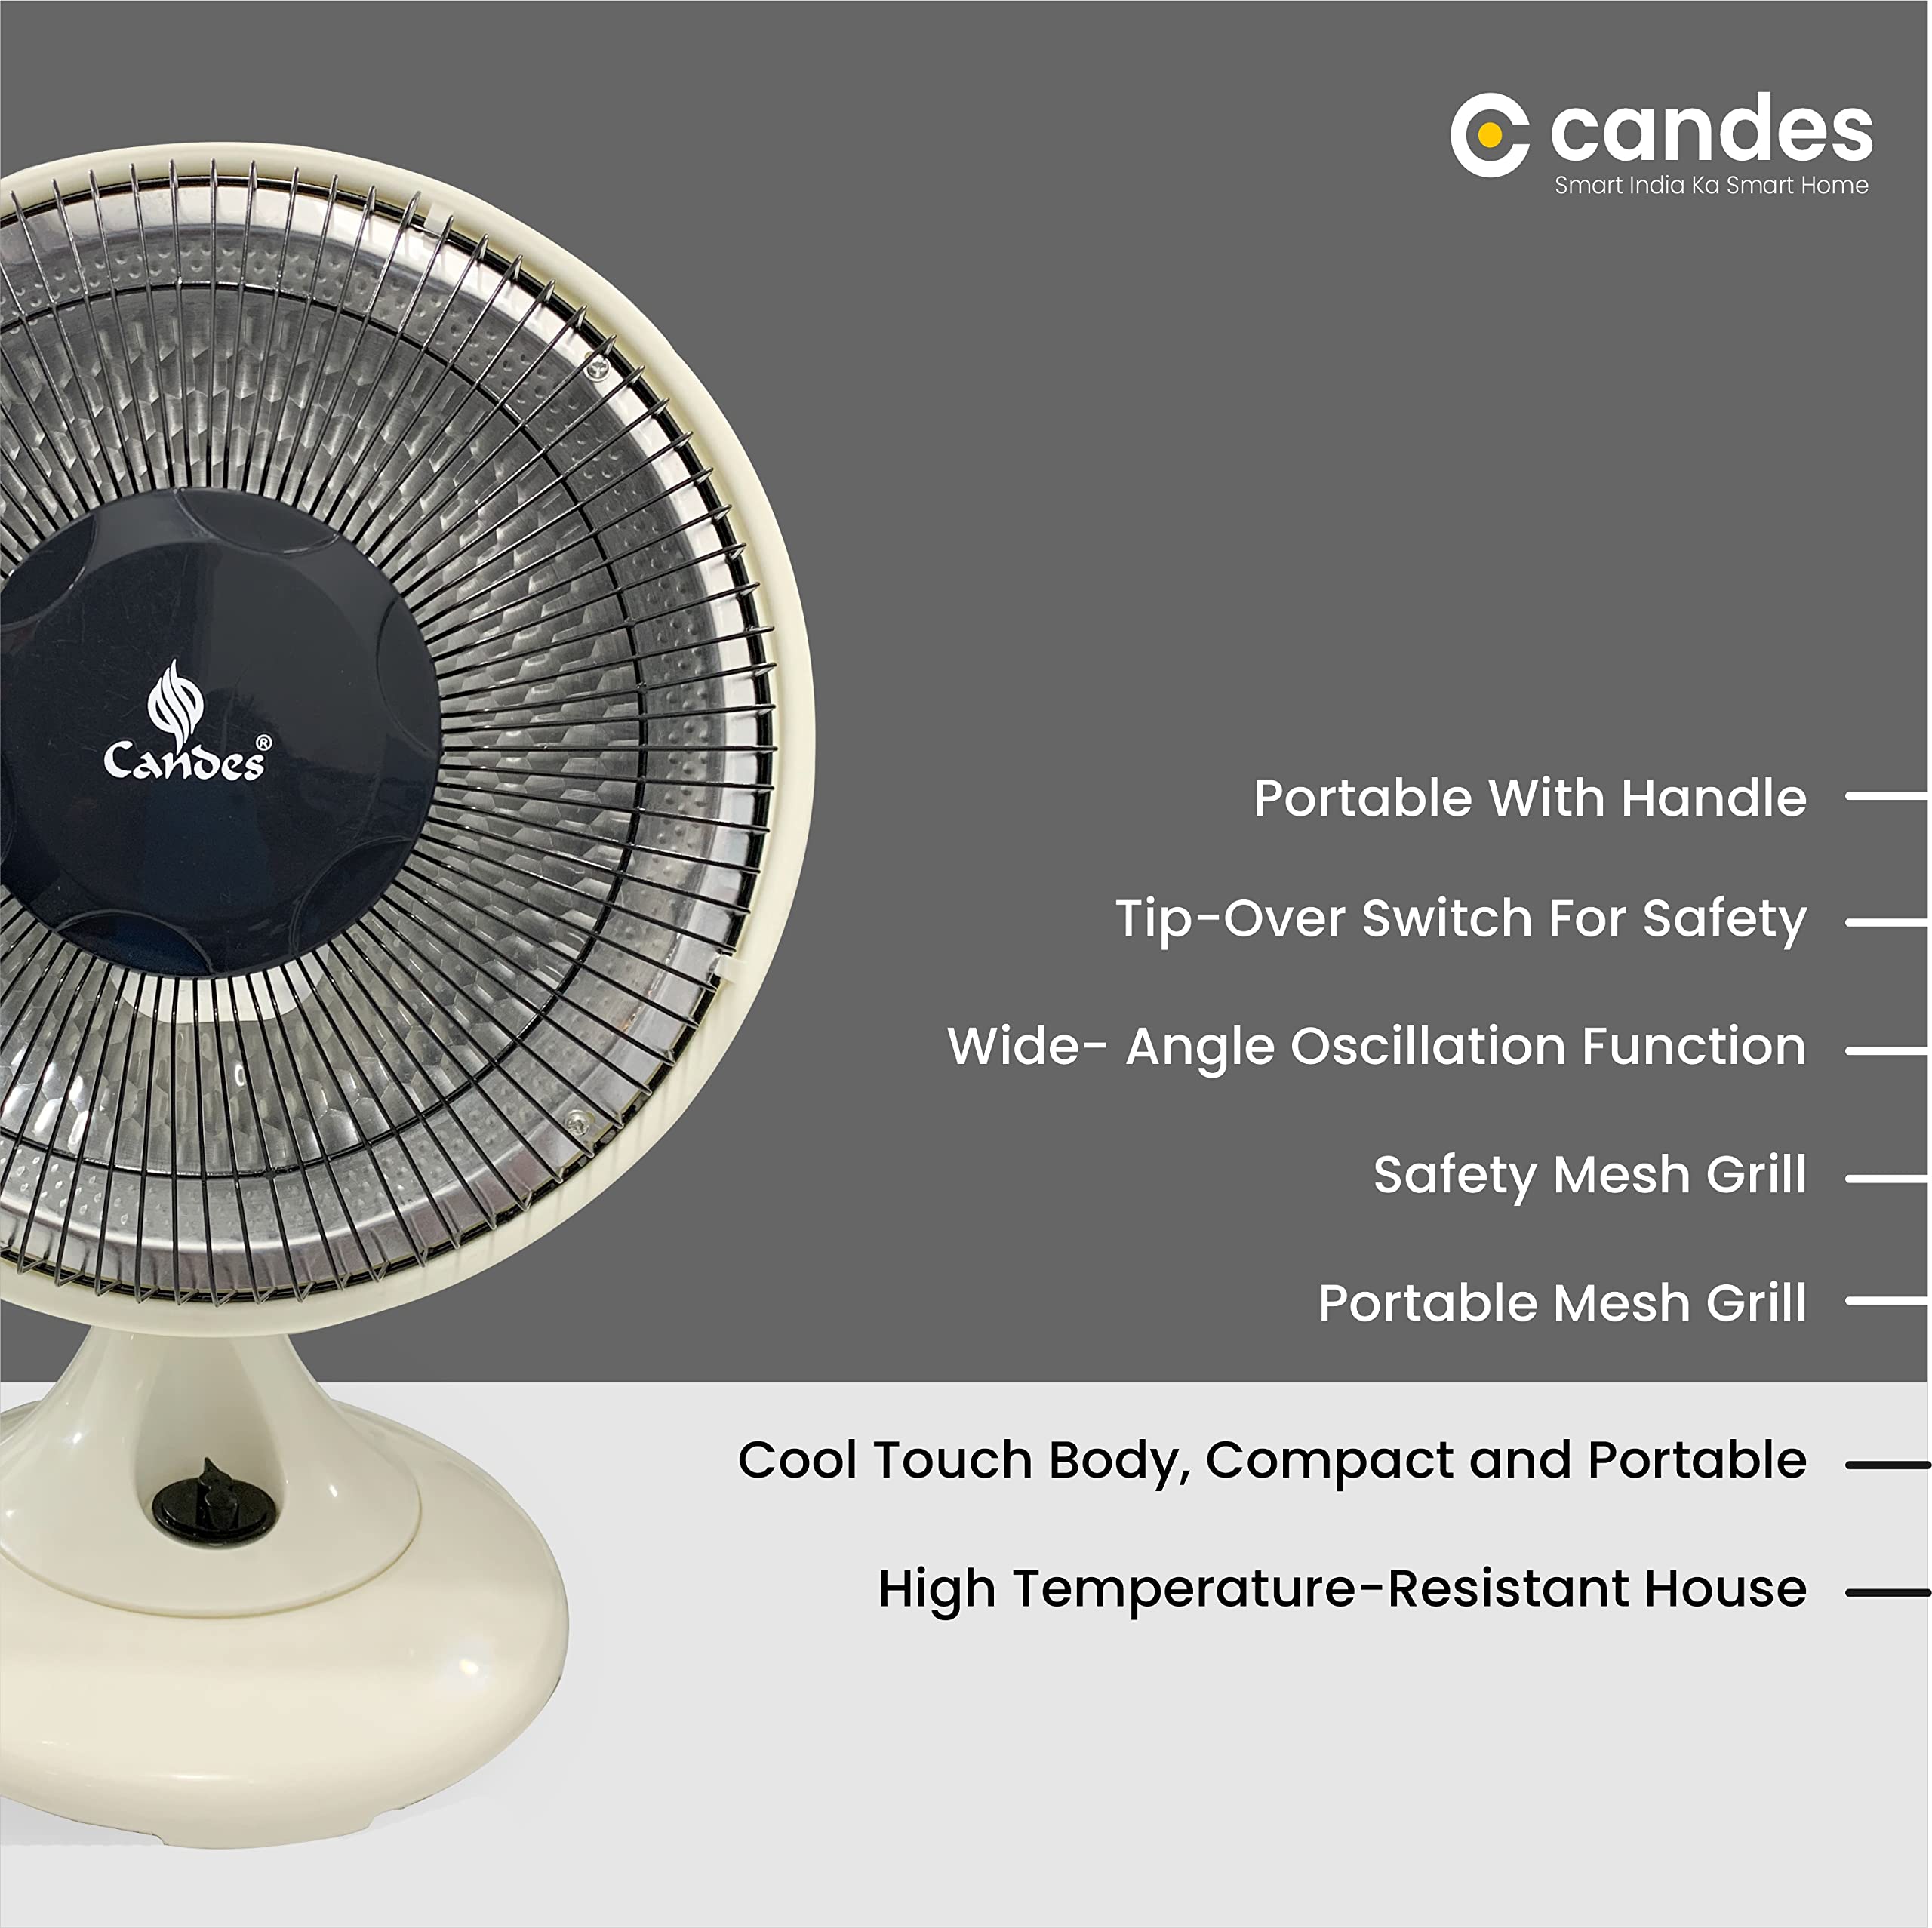 Candes Energy-Saving Noiseless Sun Room Heater with Oscillating Function, 700-750 Watts - Ivory